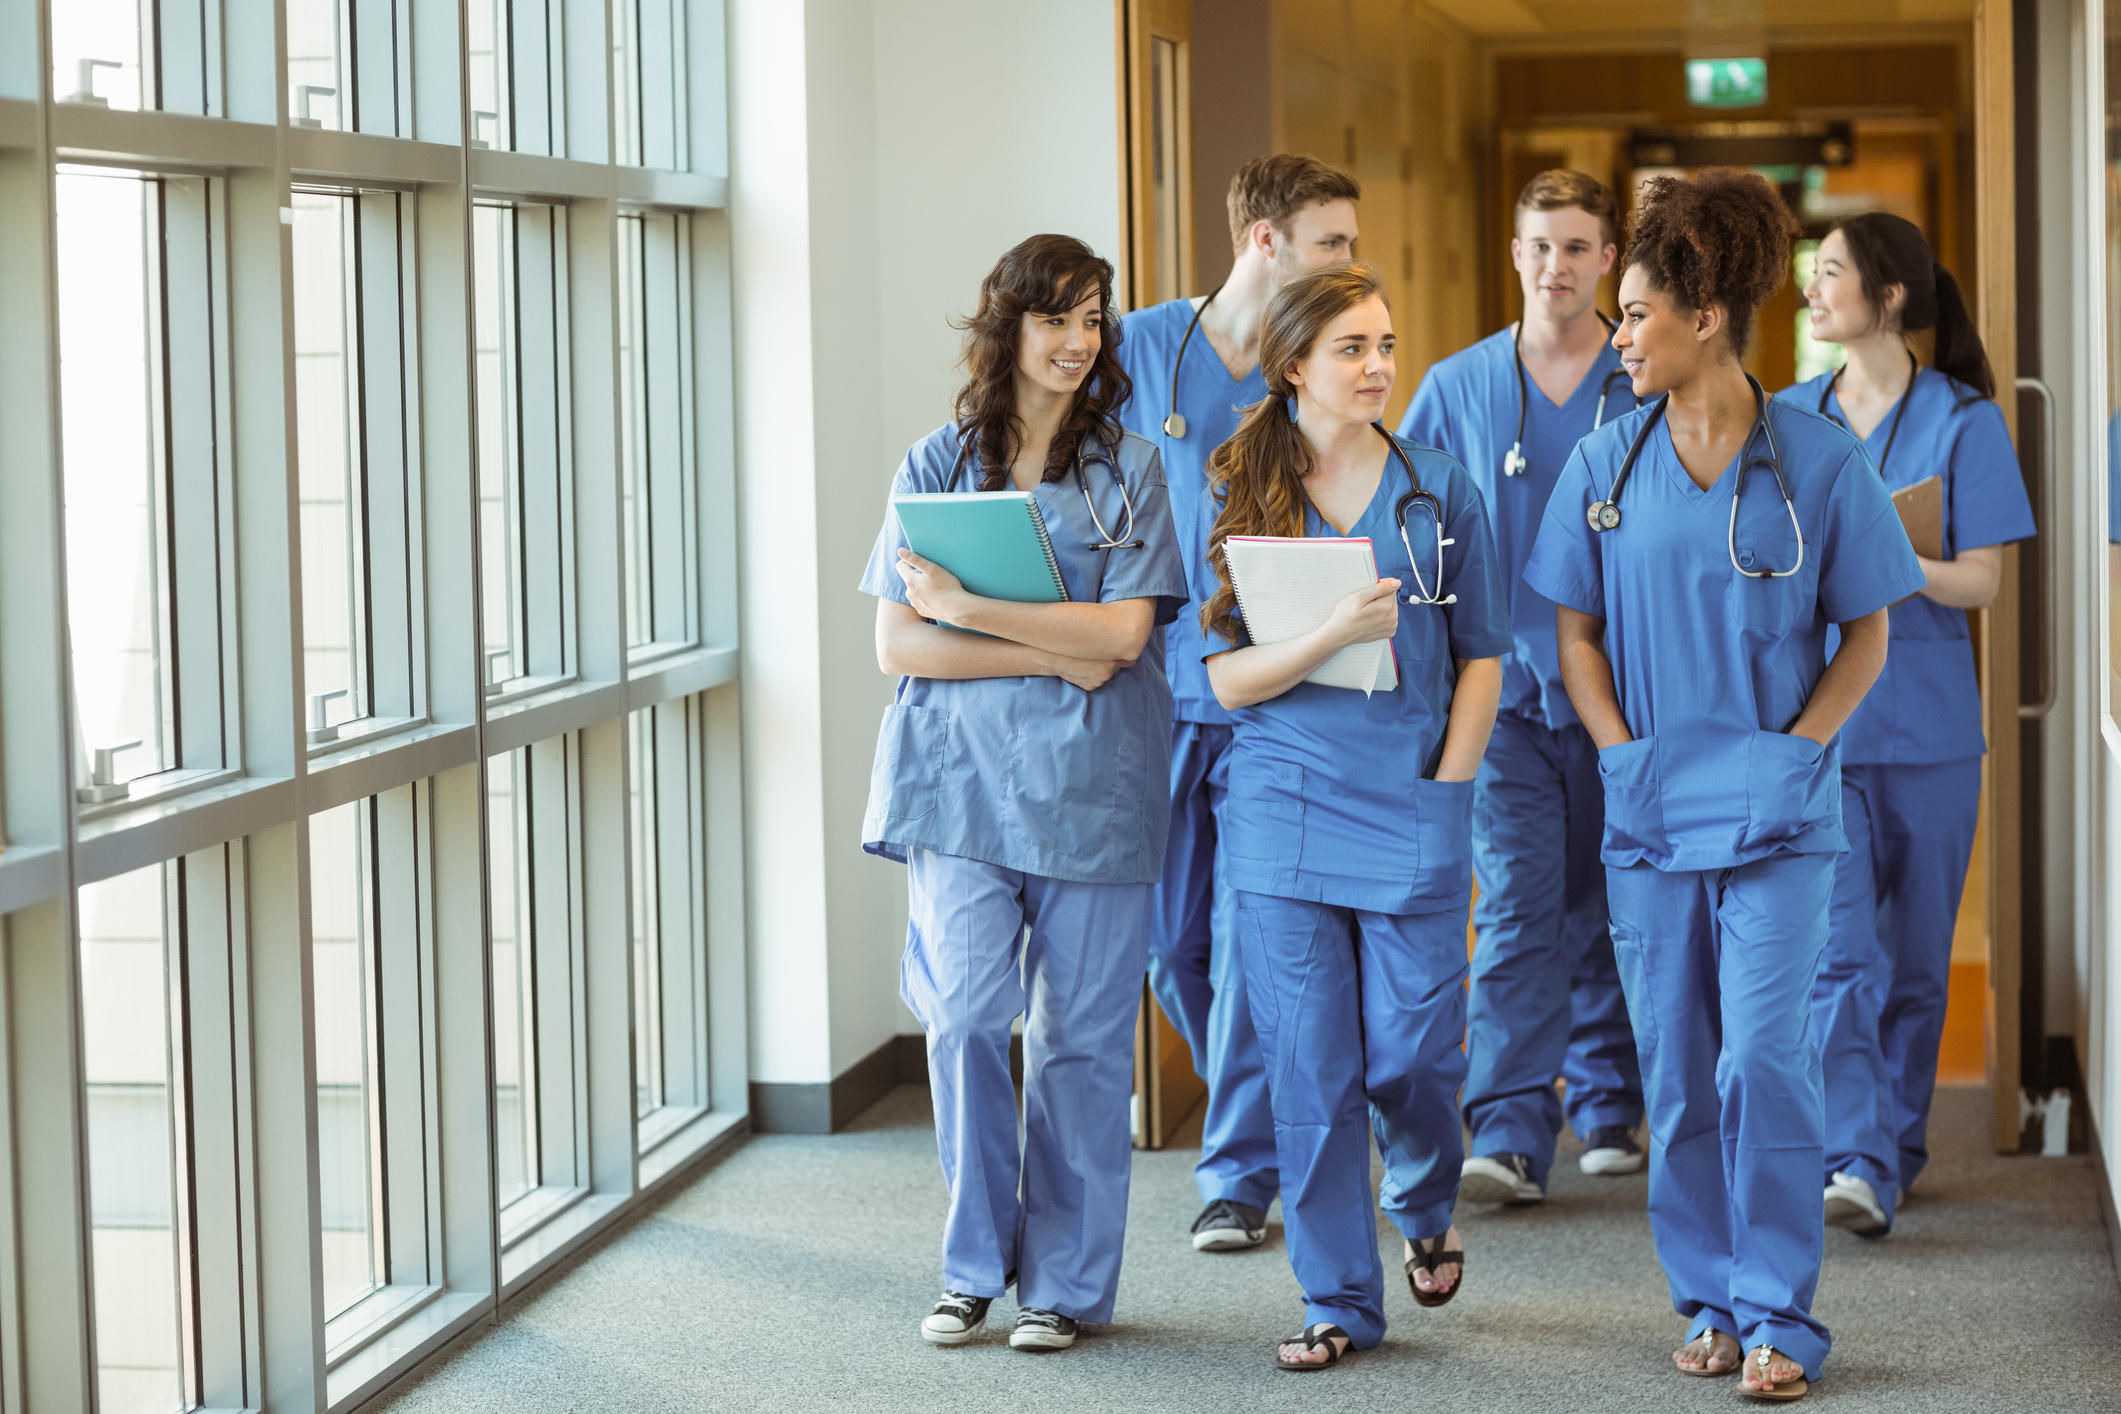 5 Benefits of Smaller Class Sizes in Medical School